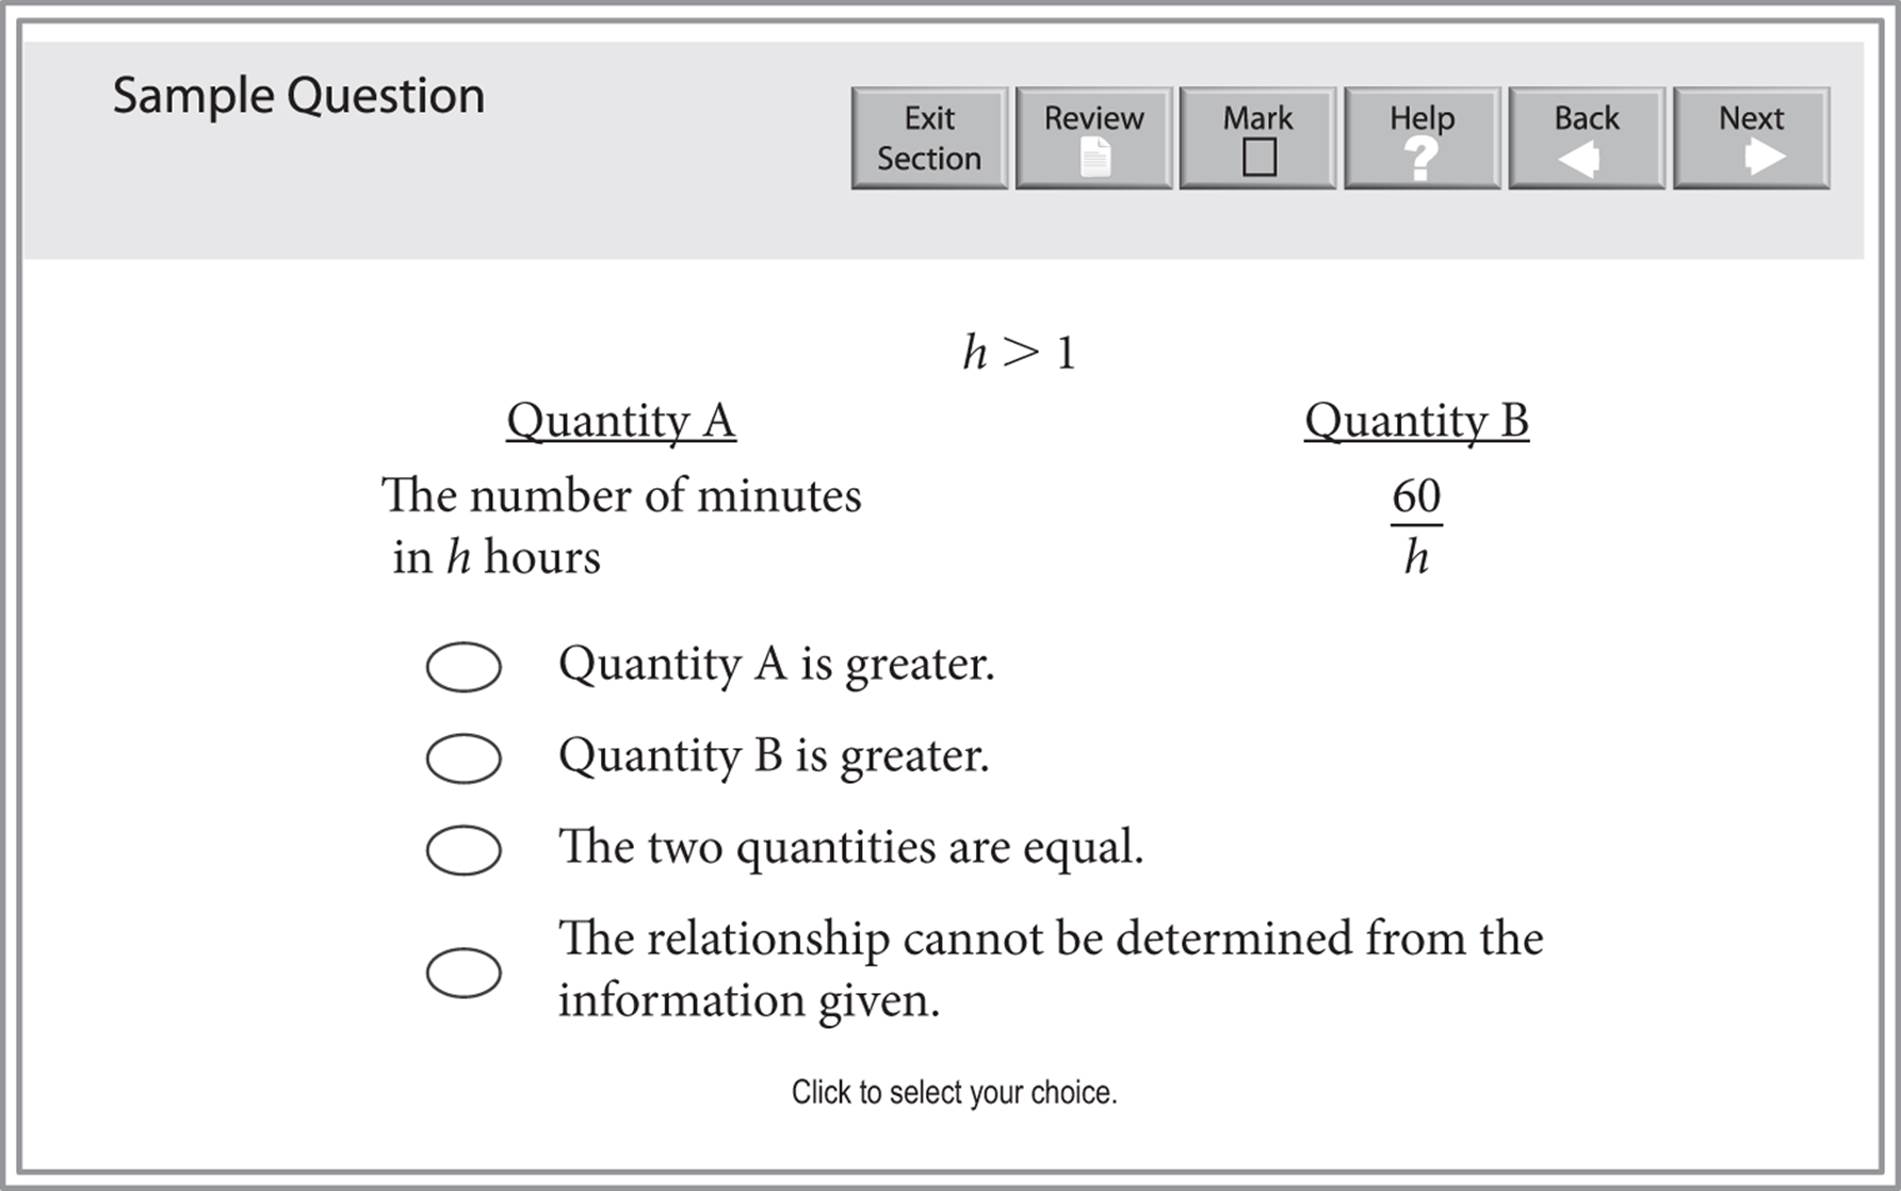 Sample quantitative comparison question. The centered information is "h is greater than 1". Quantity A  is "The number of minutes in h hours" while Quantity B is "60 over h". There are four choices for the answer: Quantity A is greater, Quantity B is greater, The two quantities are equal, and The relationship cannot be determined from the information given.